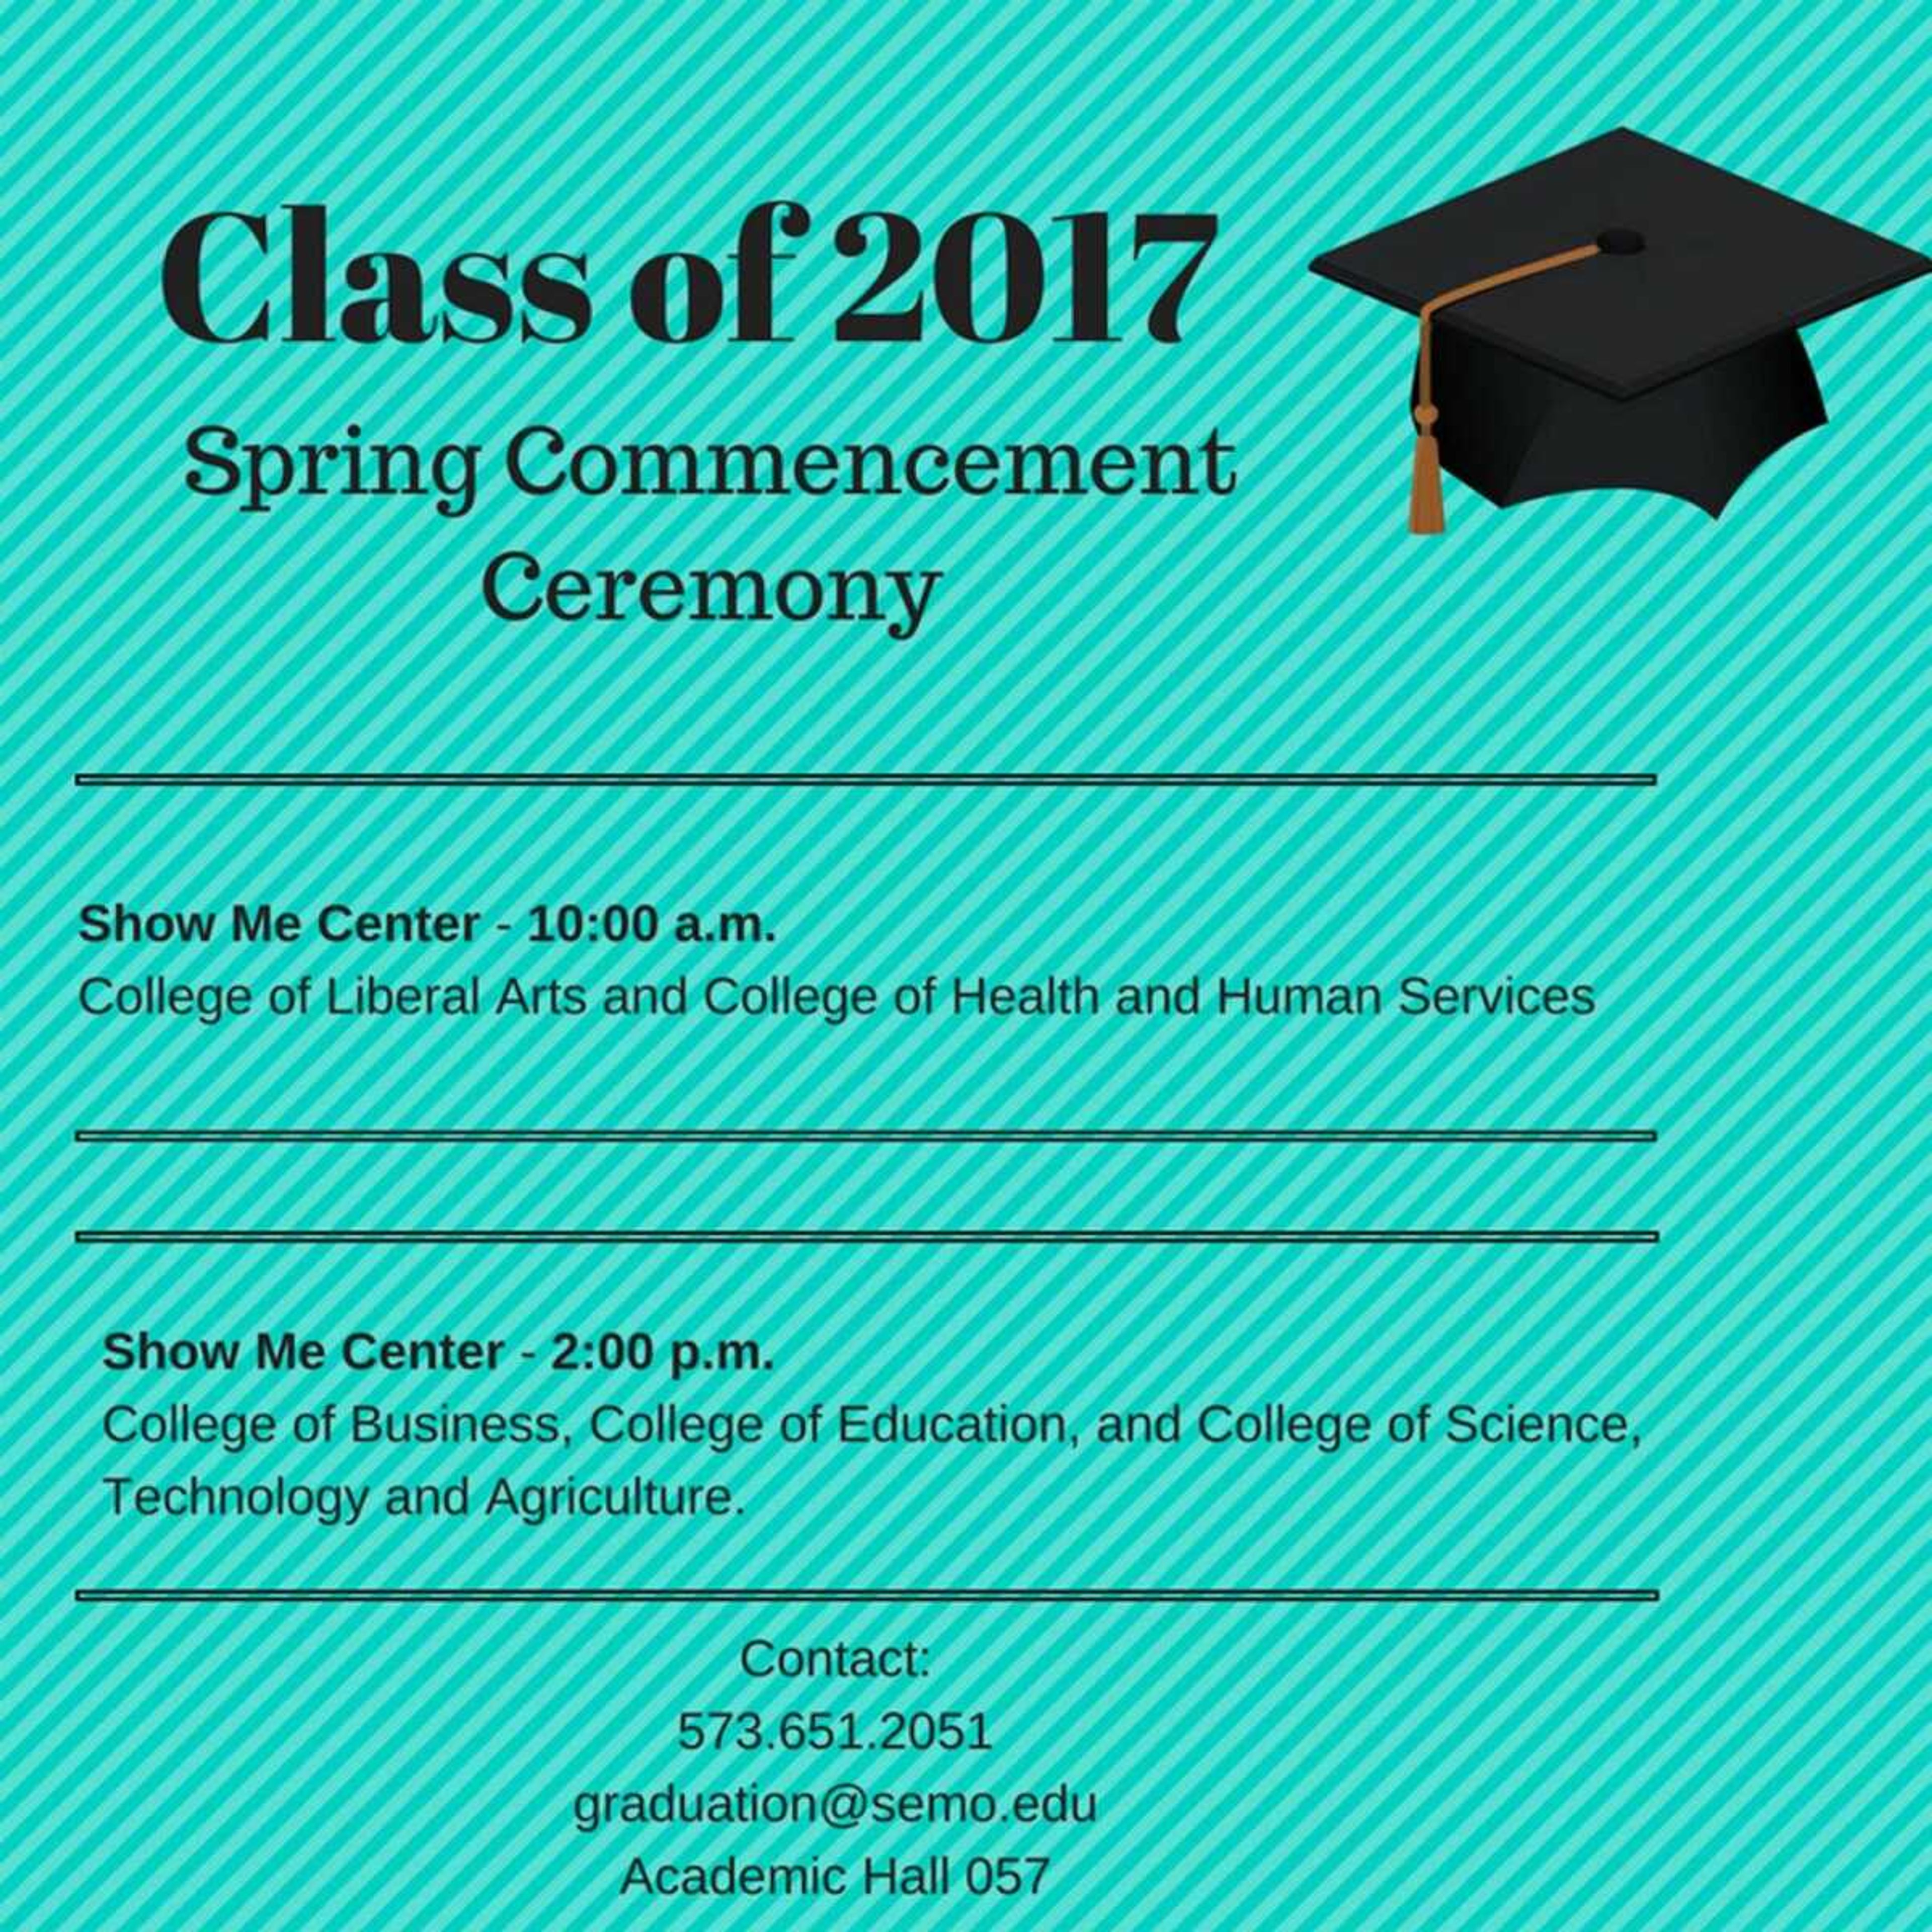 Changes made to spring commencement